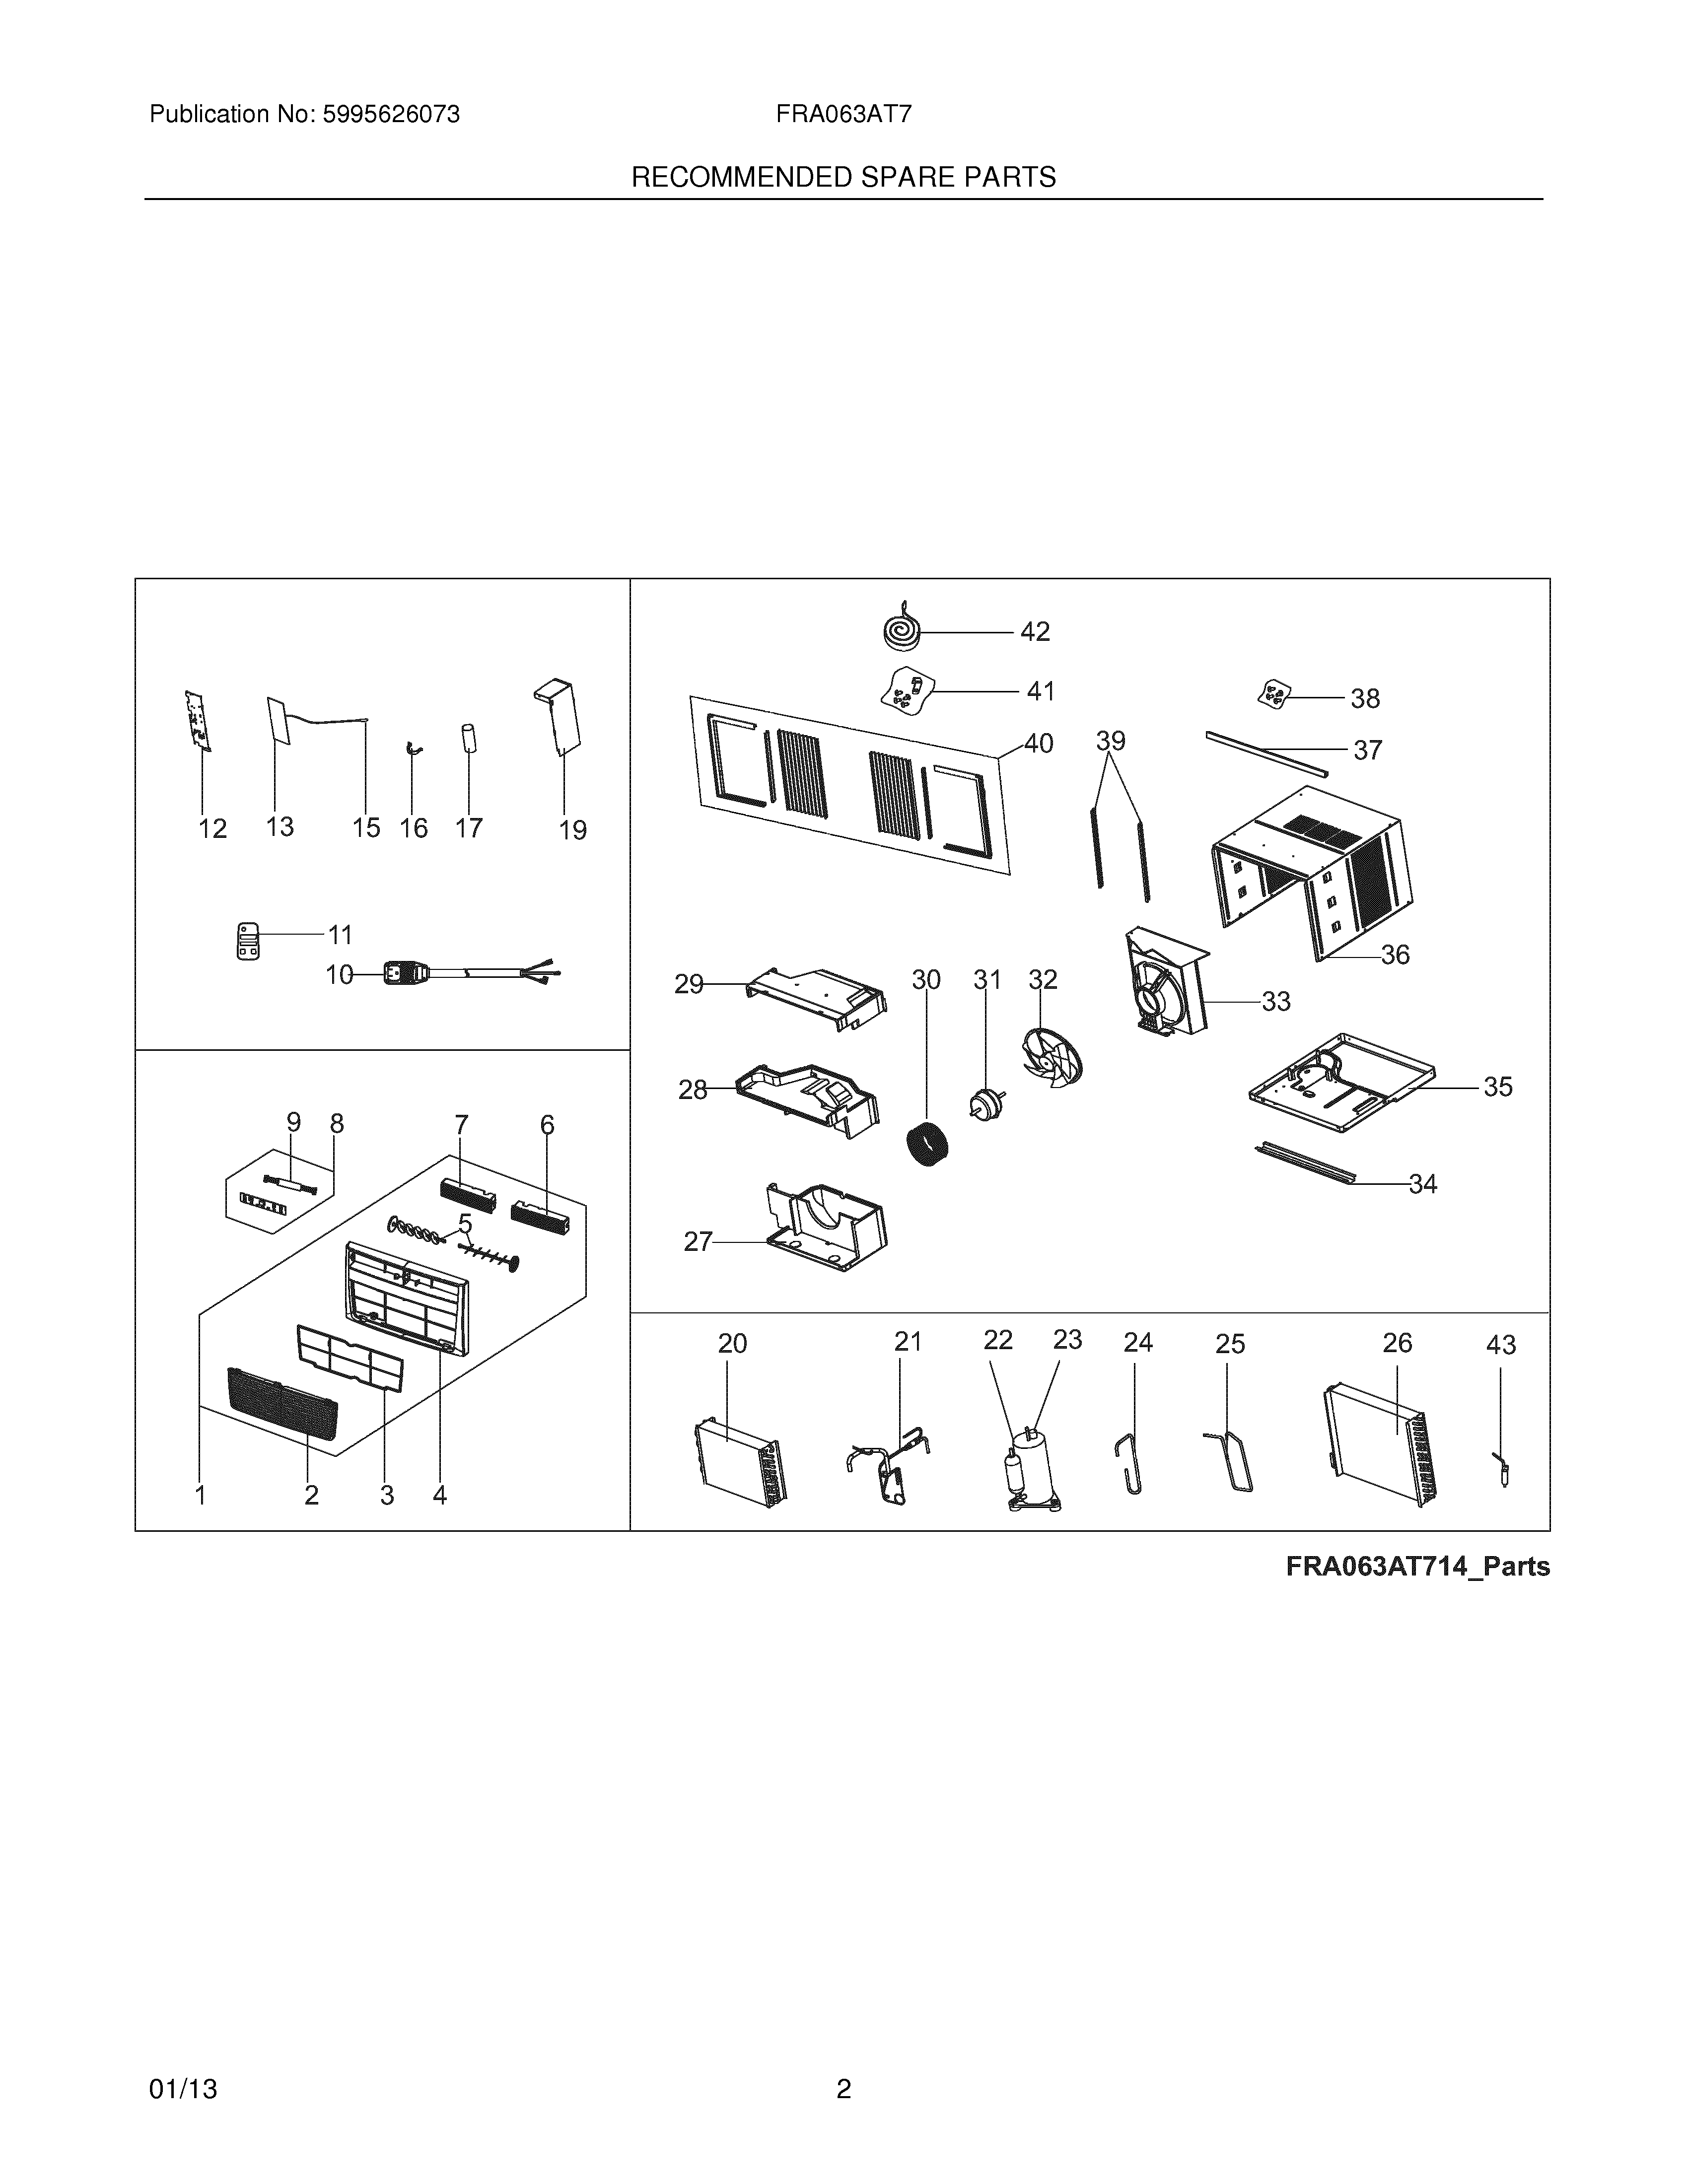 03 - RECOMMENDED SPARE PARTS